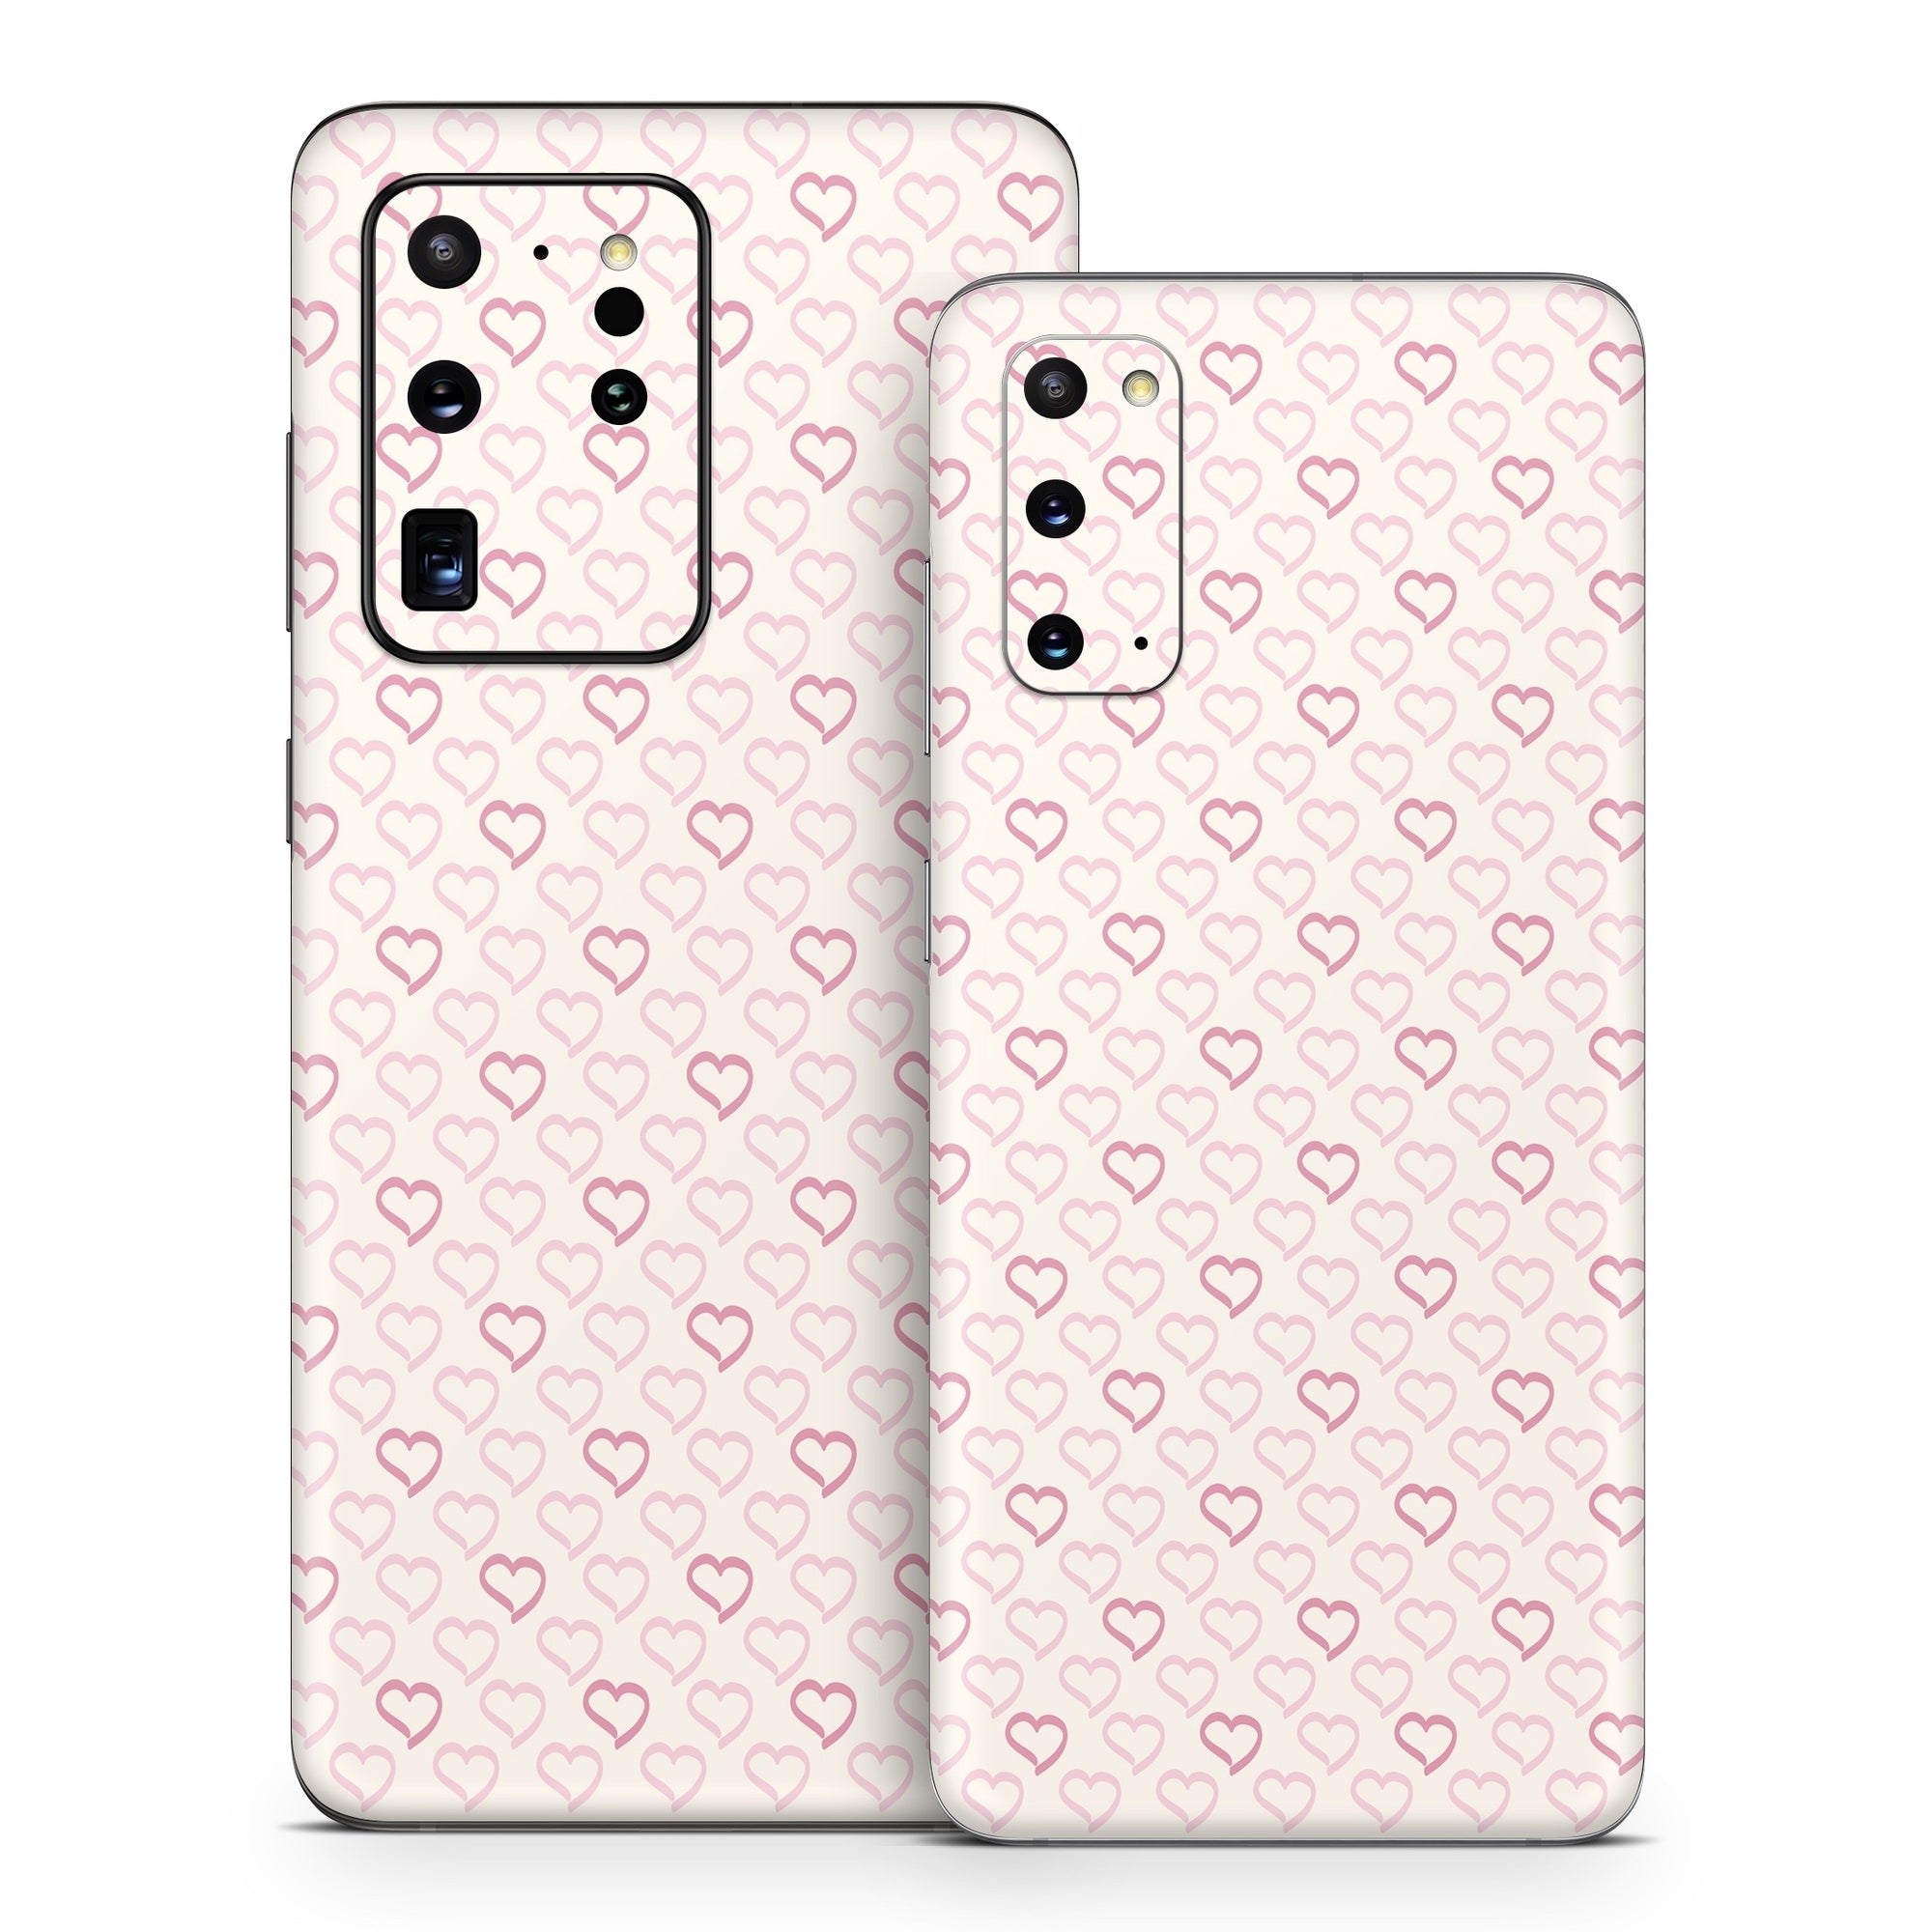 Patterned Hearts - Samsung Galaxy S20 Skin